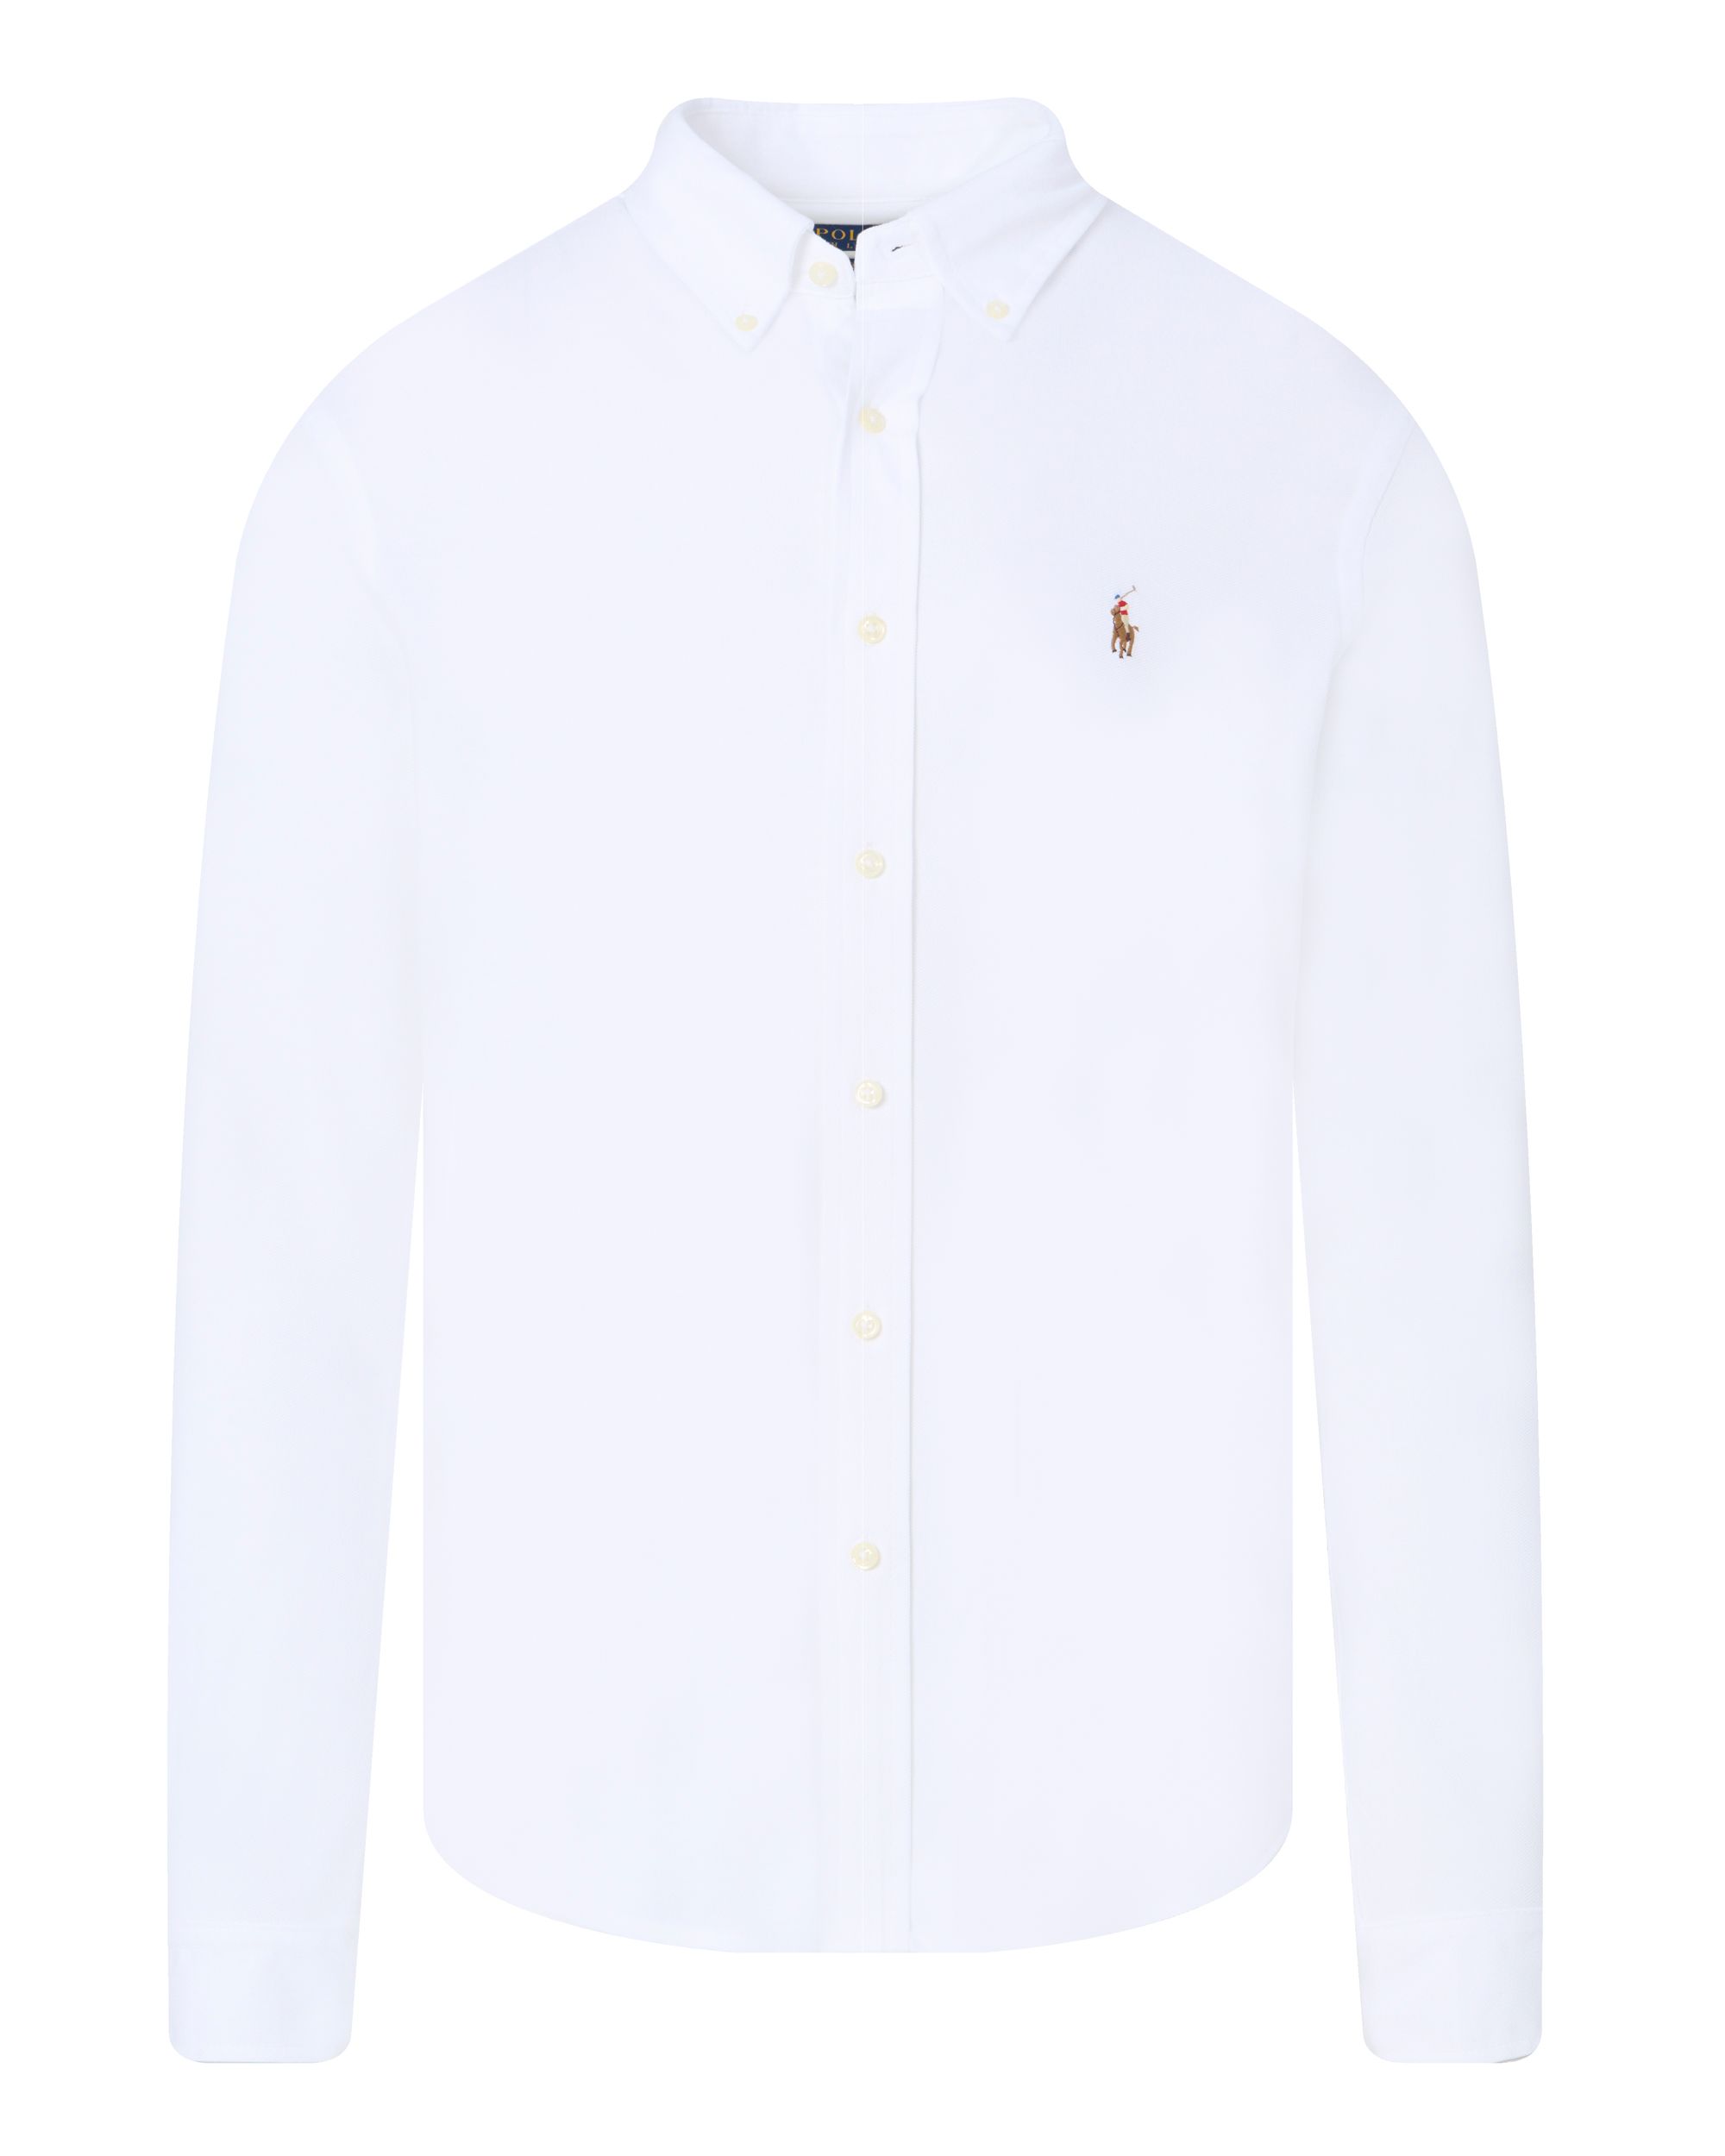 Polo Ralph Lauren Casual Overhemd LM Wit 091538-001-L